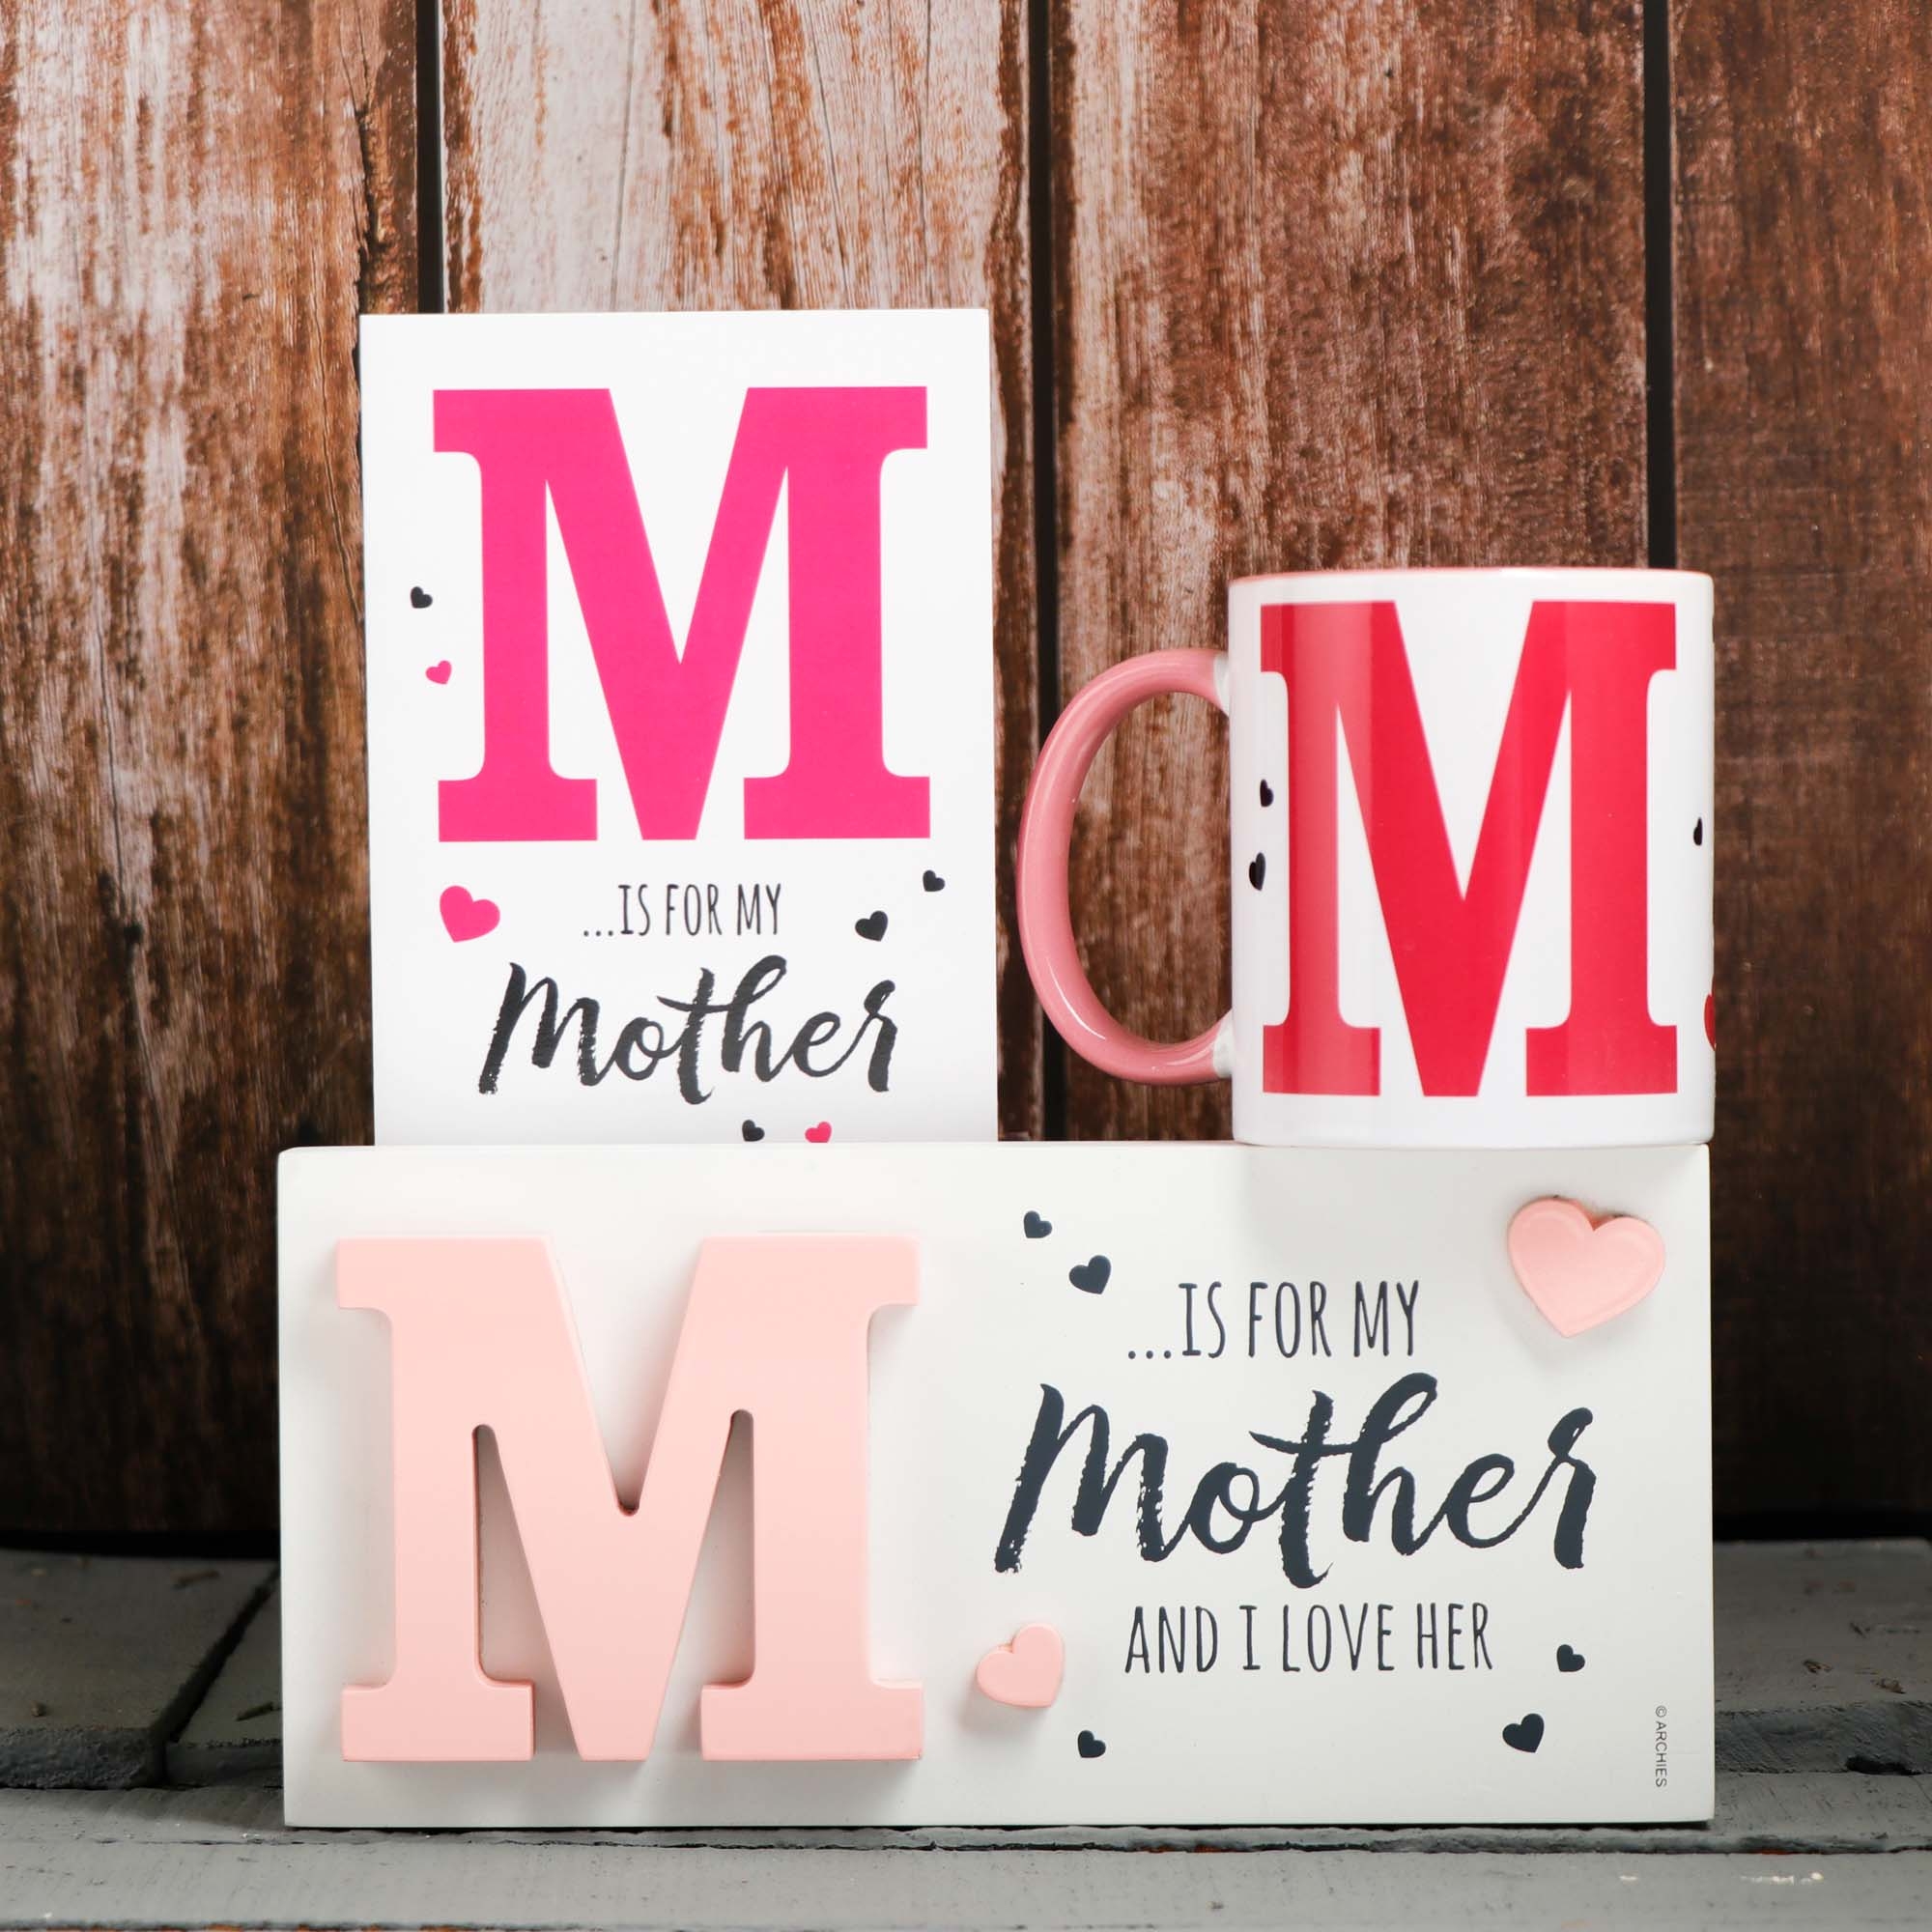 Archies | Archies KEEP SAKE Mother's Day Gift Combo with Ceramic Mug and Elevated Initial Quotation - with a FREE GREETING CARD